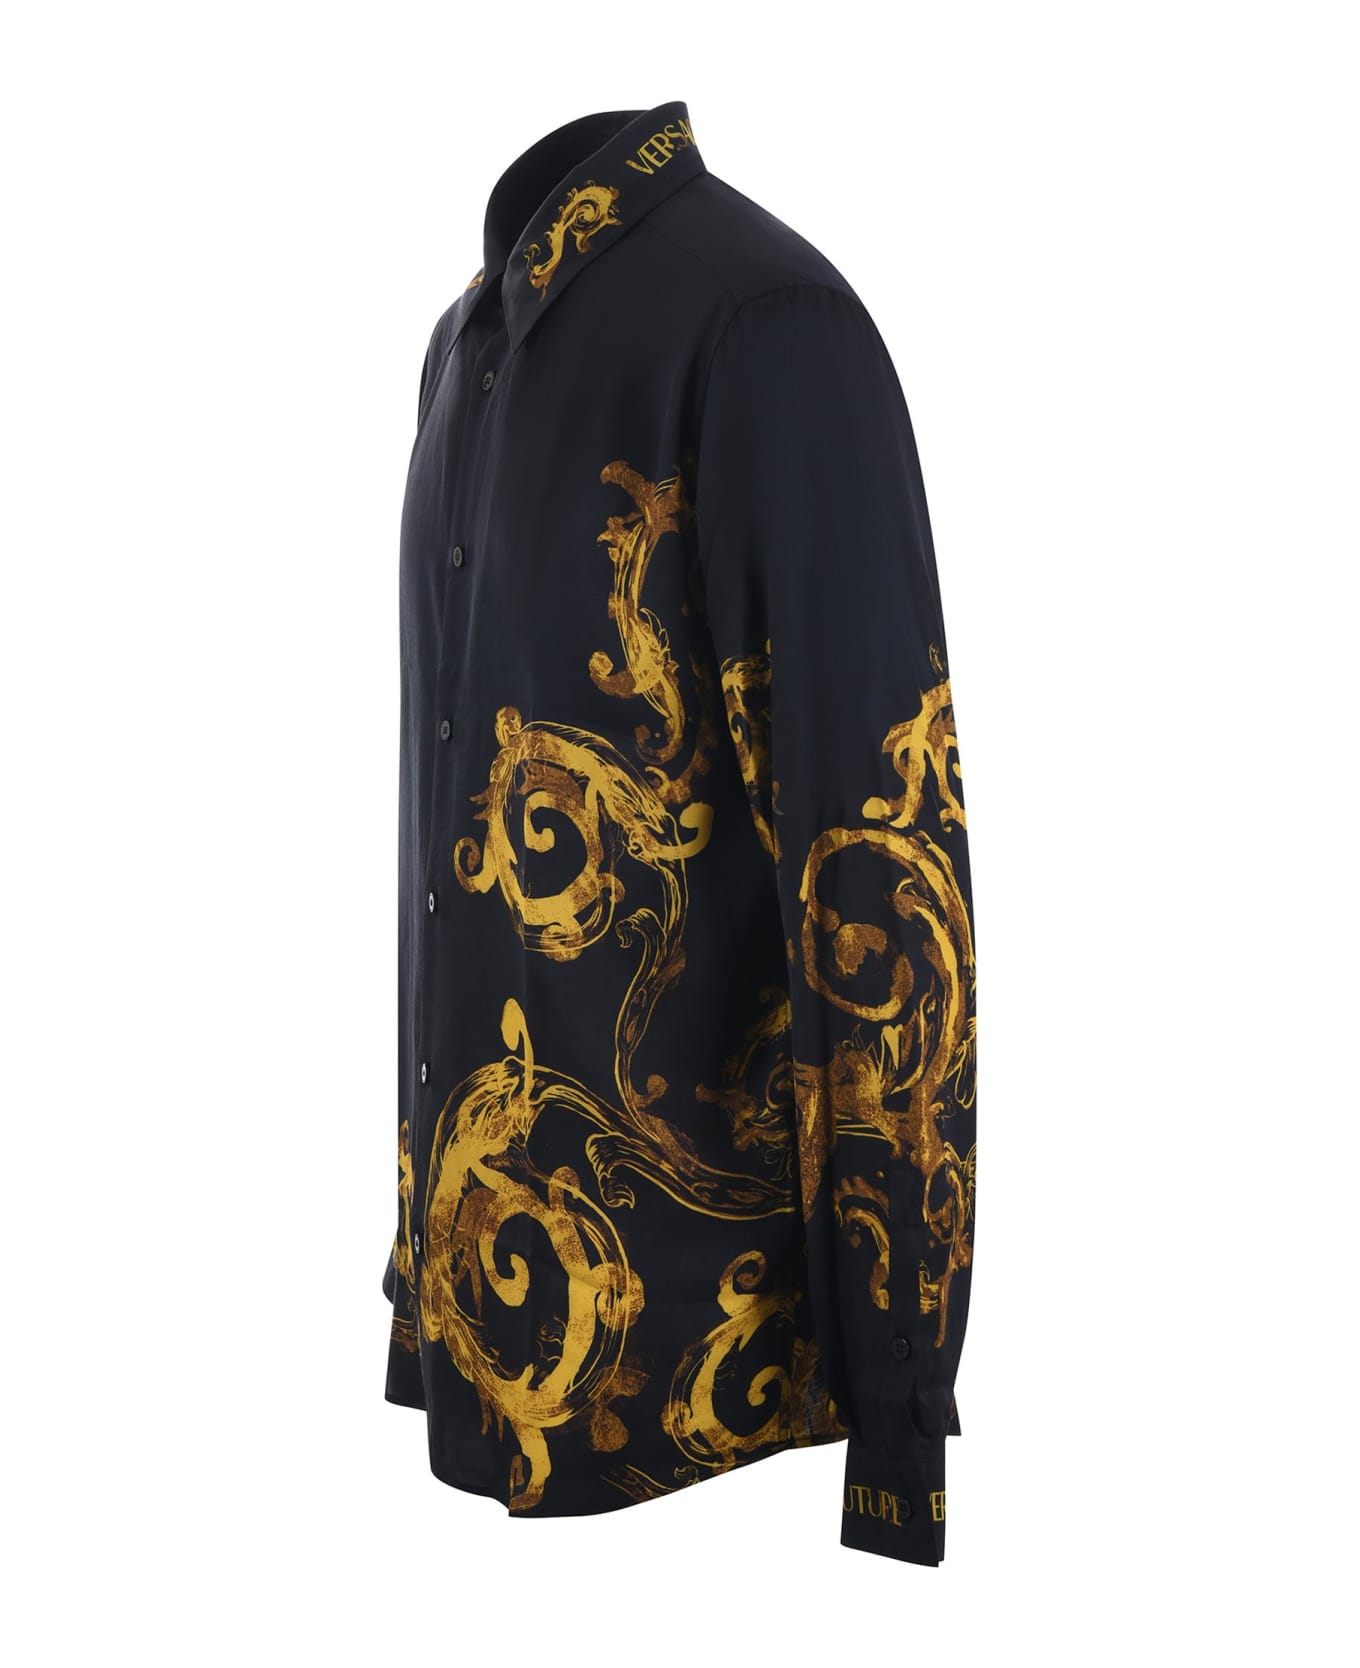 Versace Jeans Couture Baroque Shirt - Nero/oro